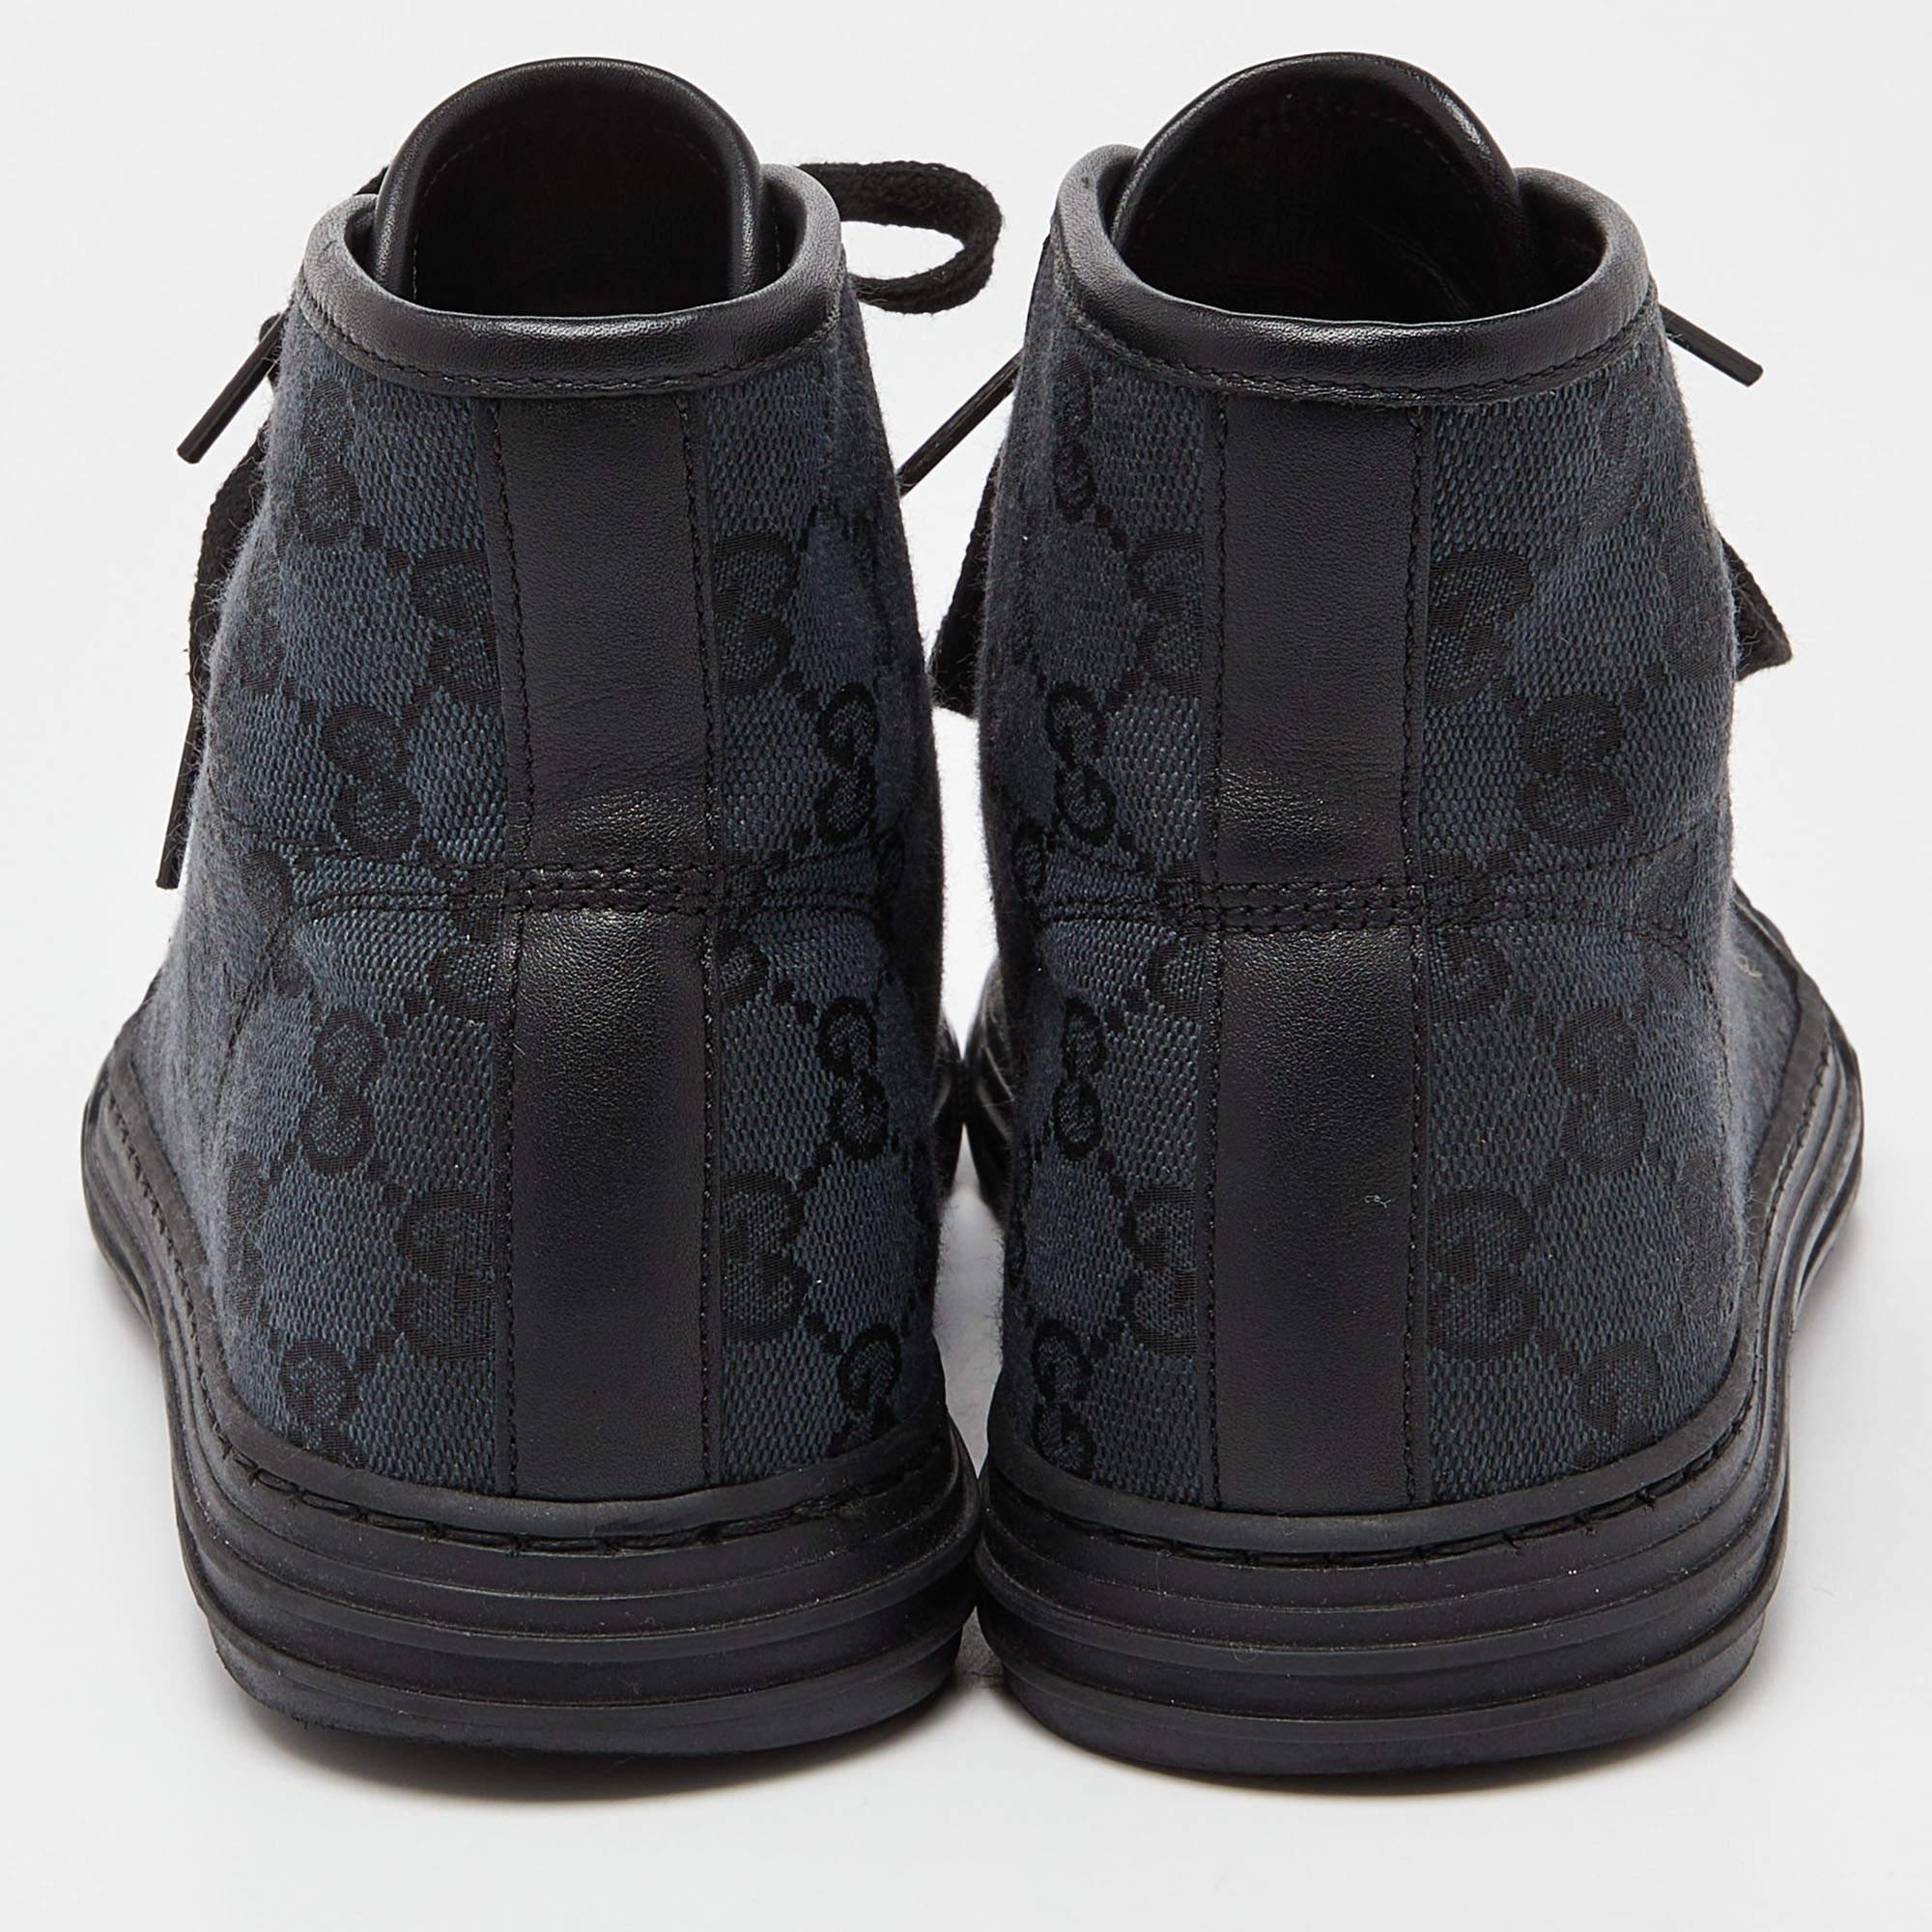 Gucci Black GG Canvas and Leather Brooklyn High Top Sneakers Size 37.5 For Sale 3